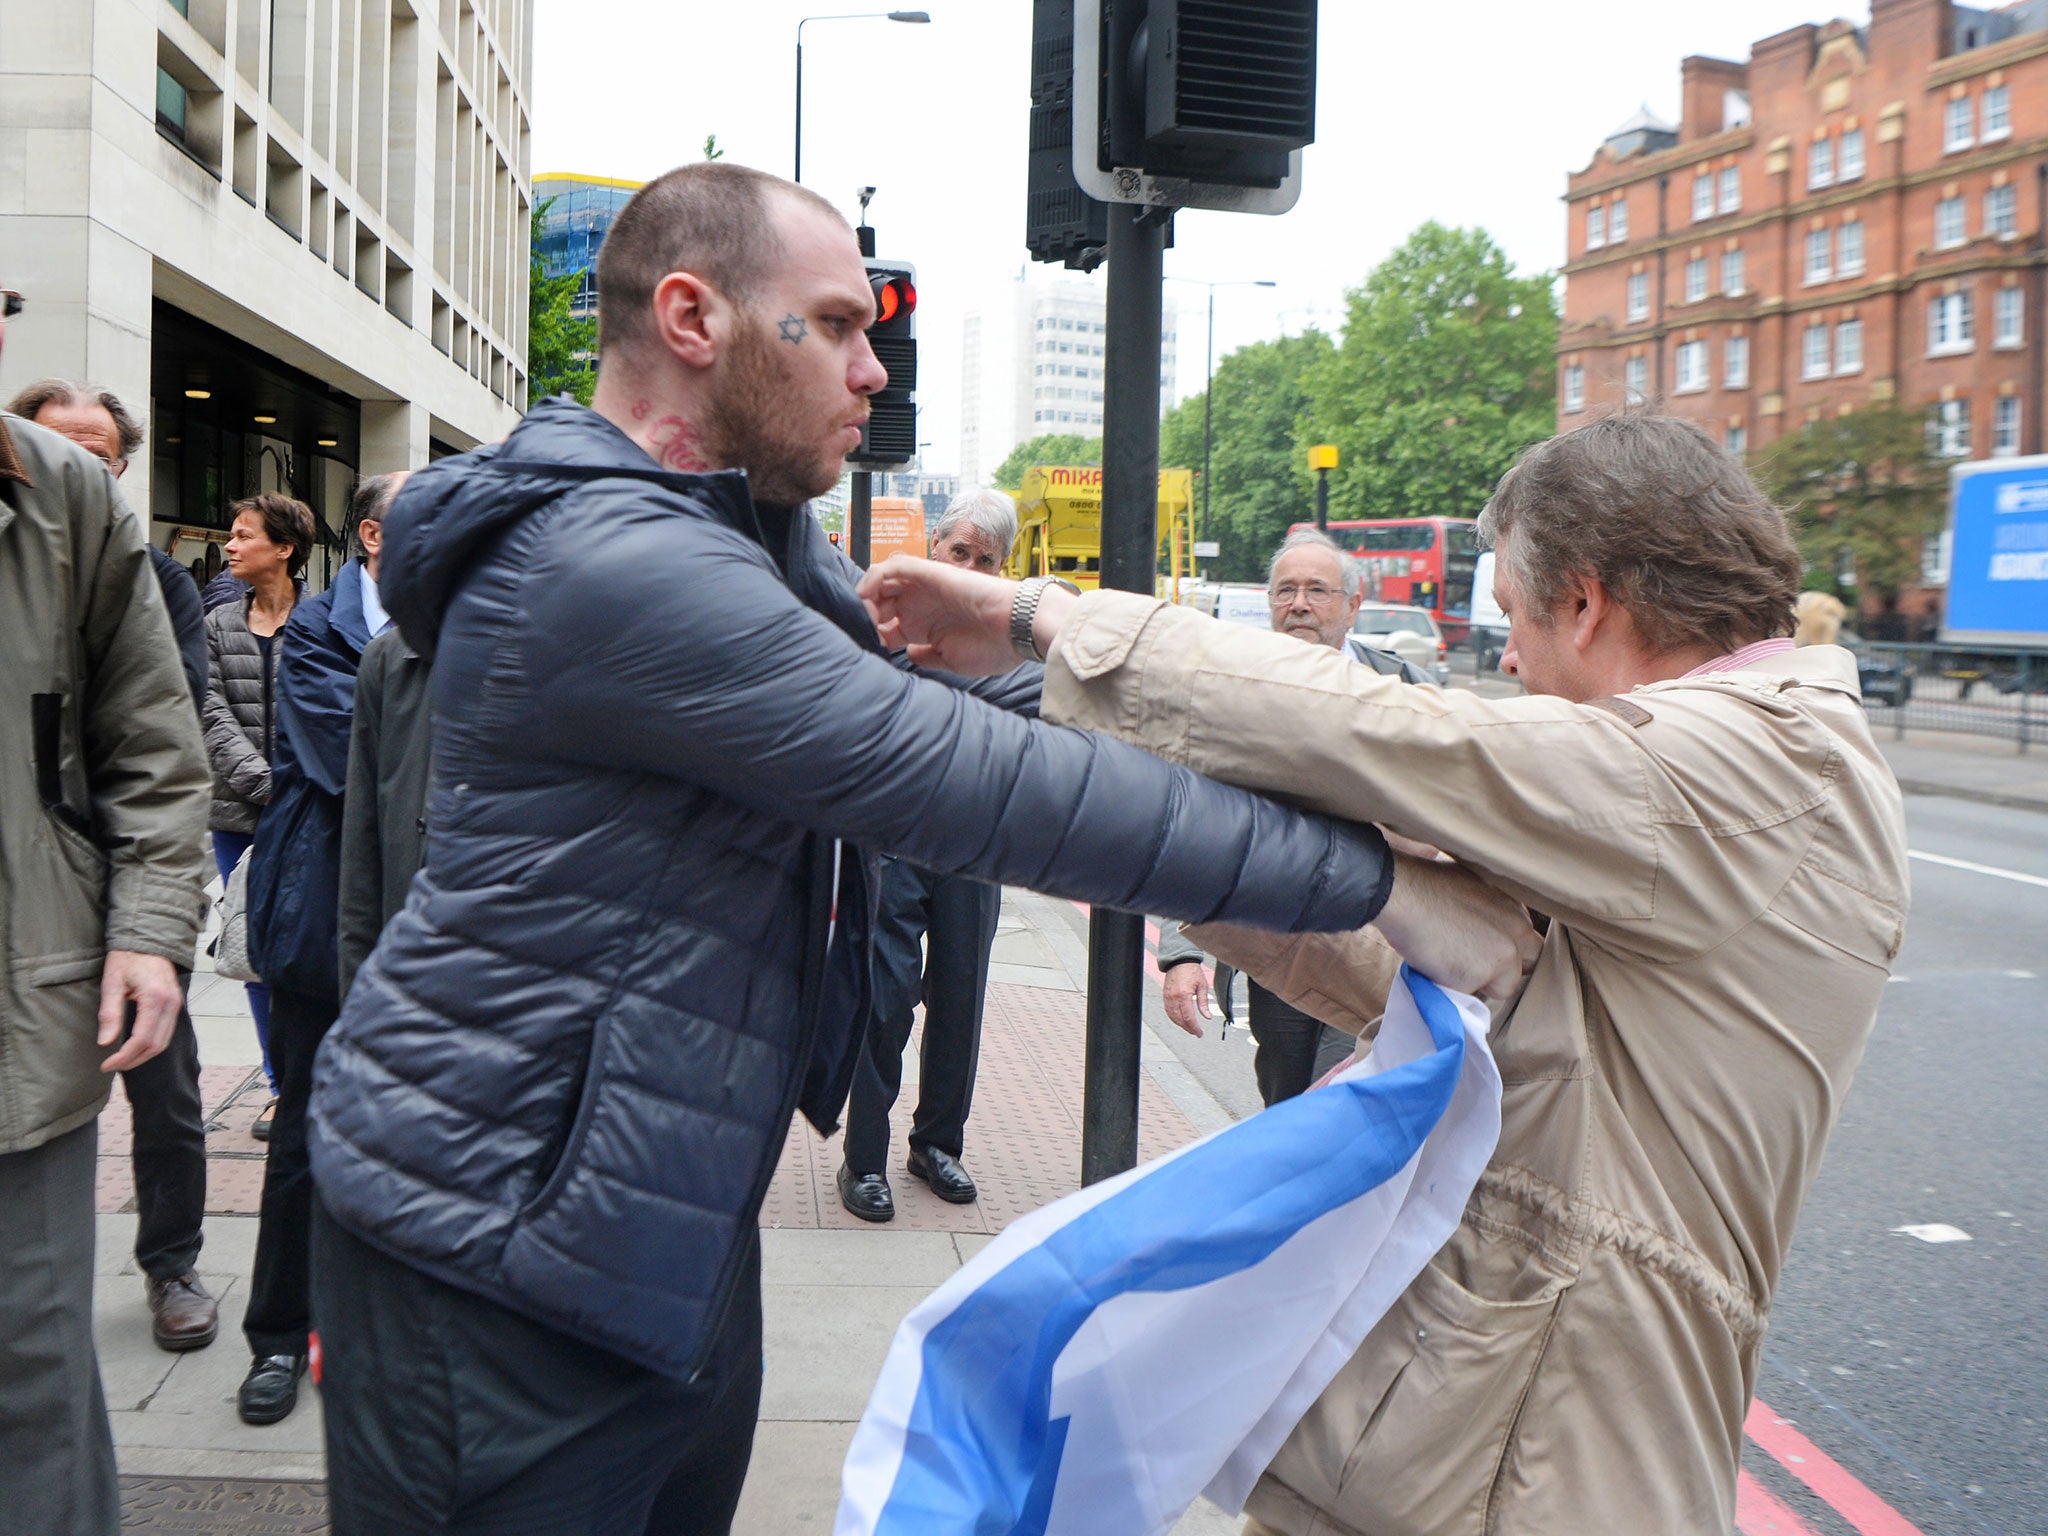 A scuffle outside Westminster Magistrates' Court, where Alison Chabloz was found guilty of posting antisemitic songs online